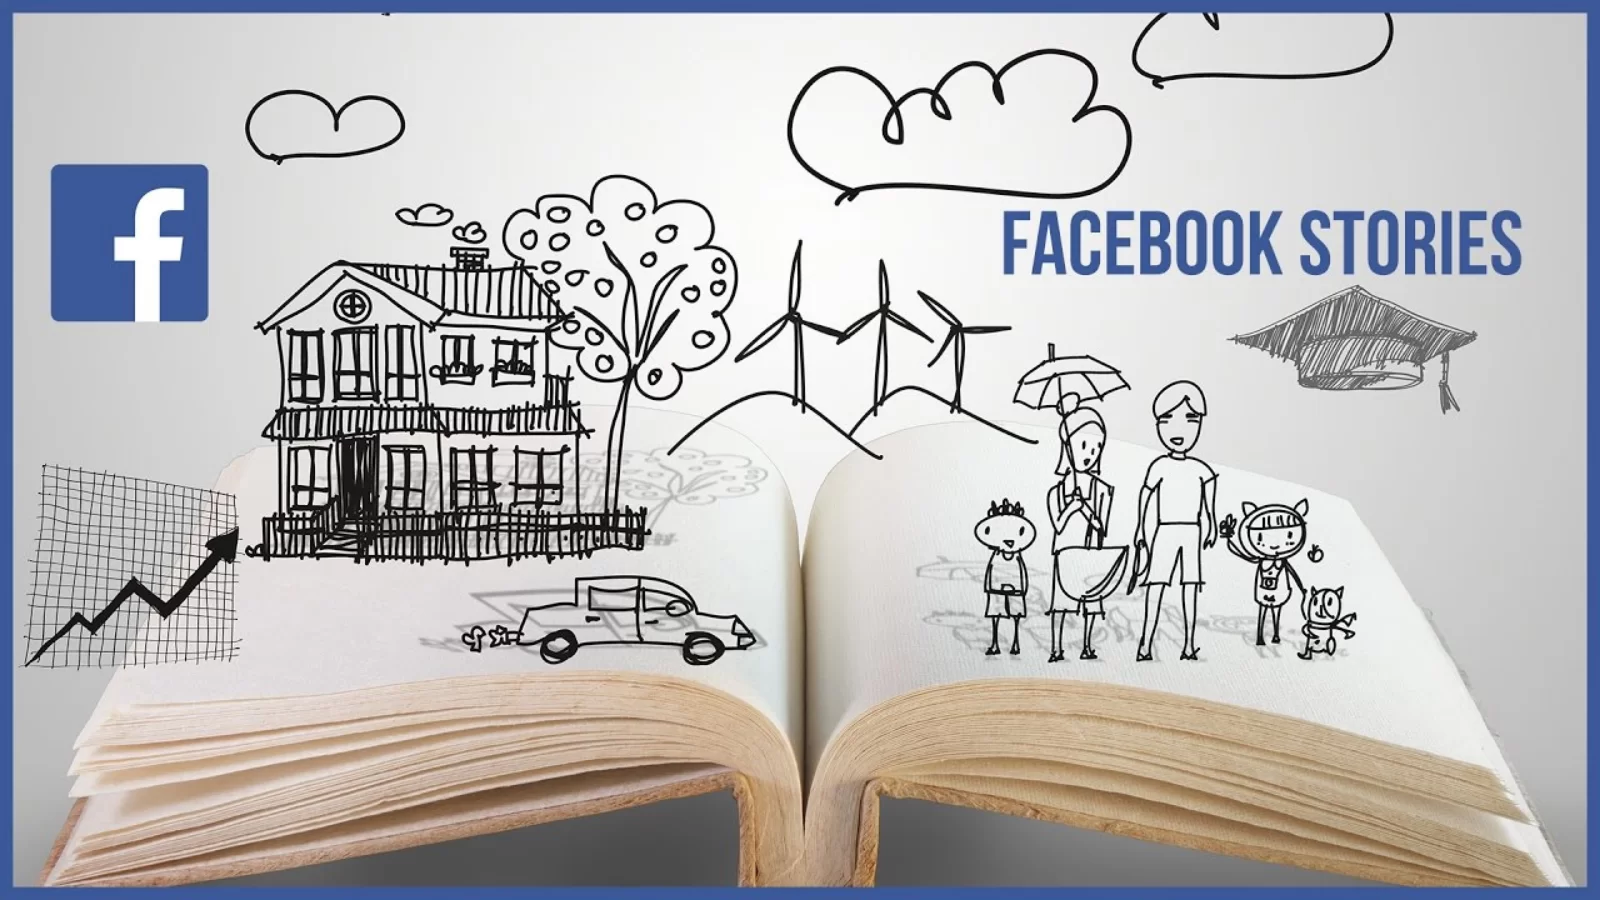 Facebook stories as a tool to marketing